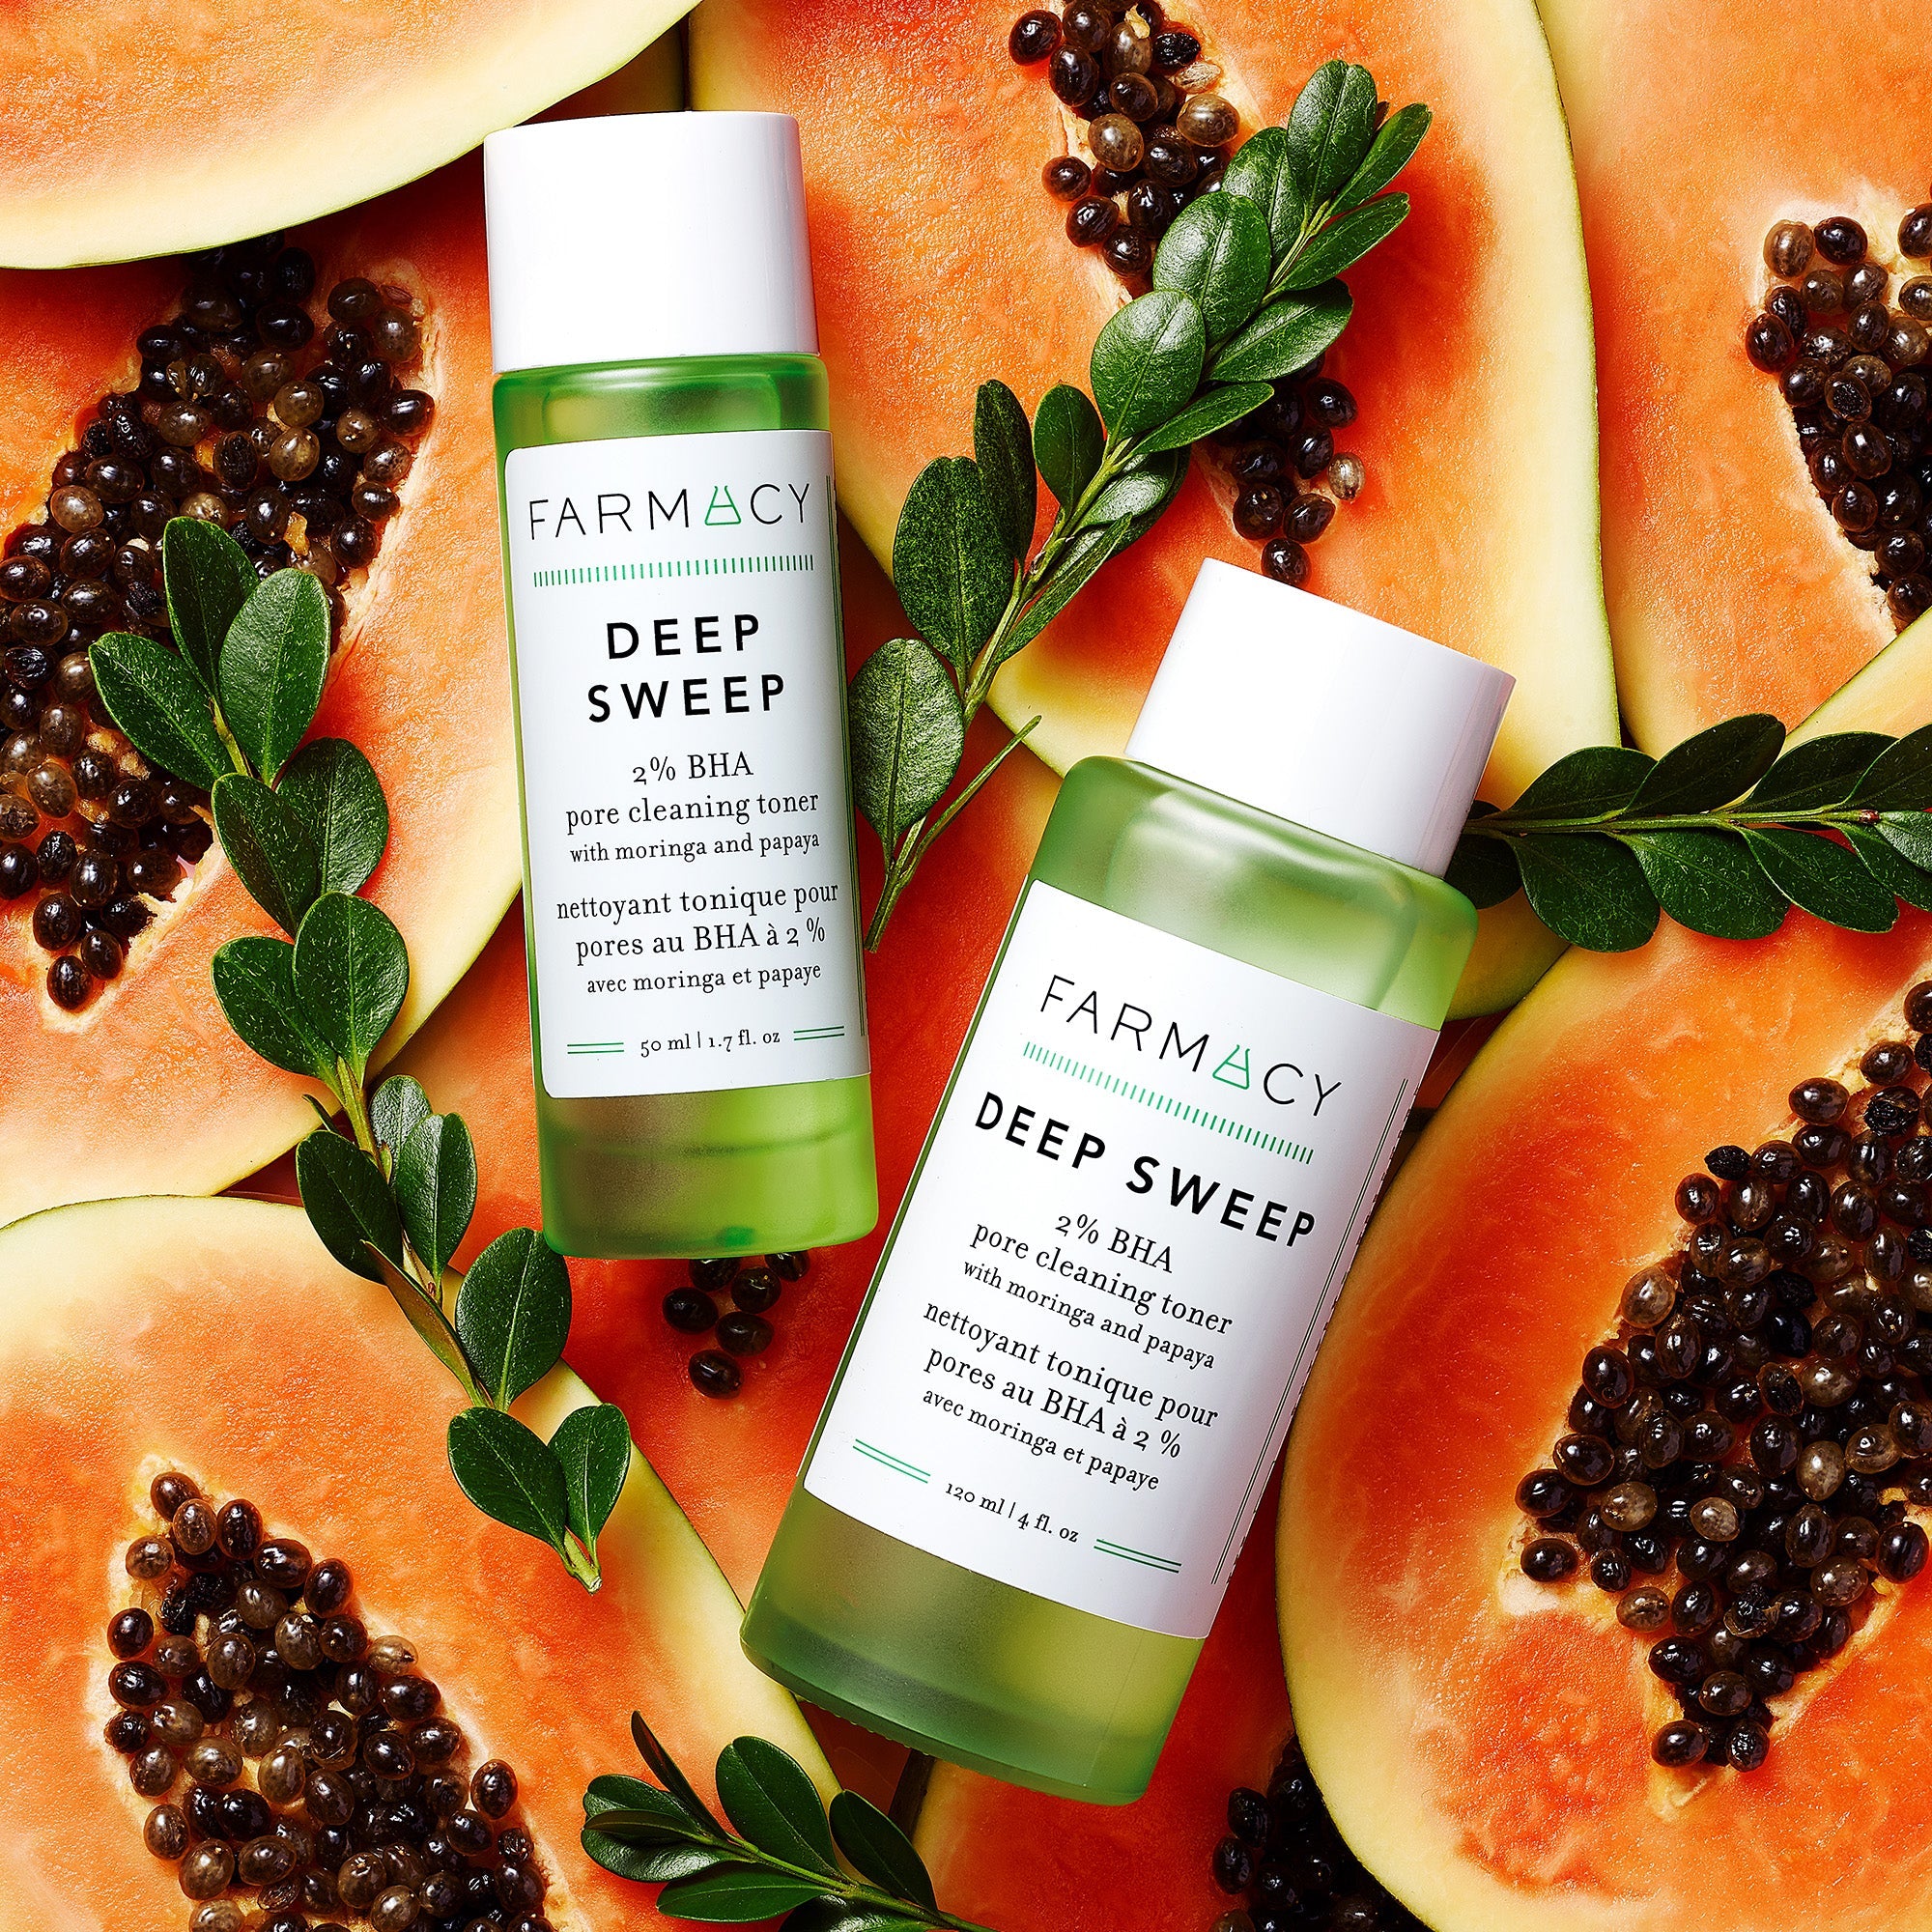 Two bottles of Farmacy's Deep Sweep sitting on top of papayas